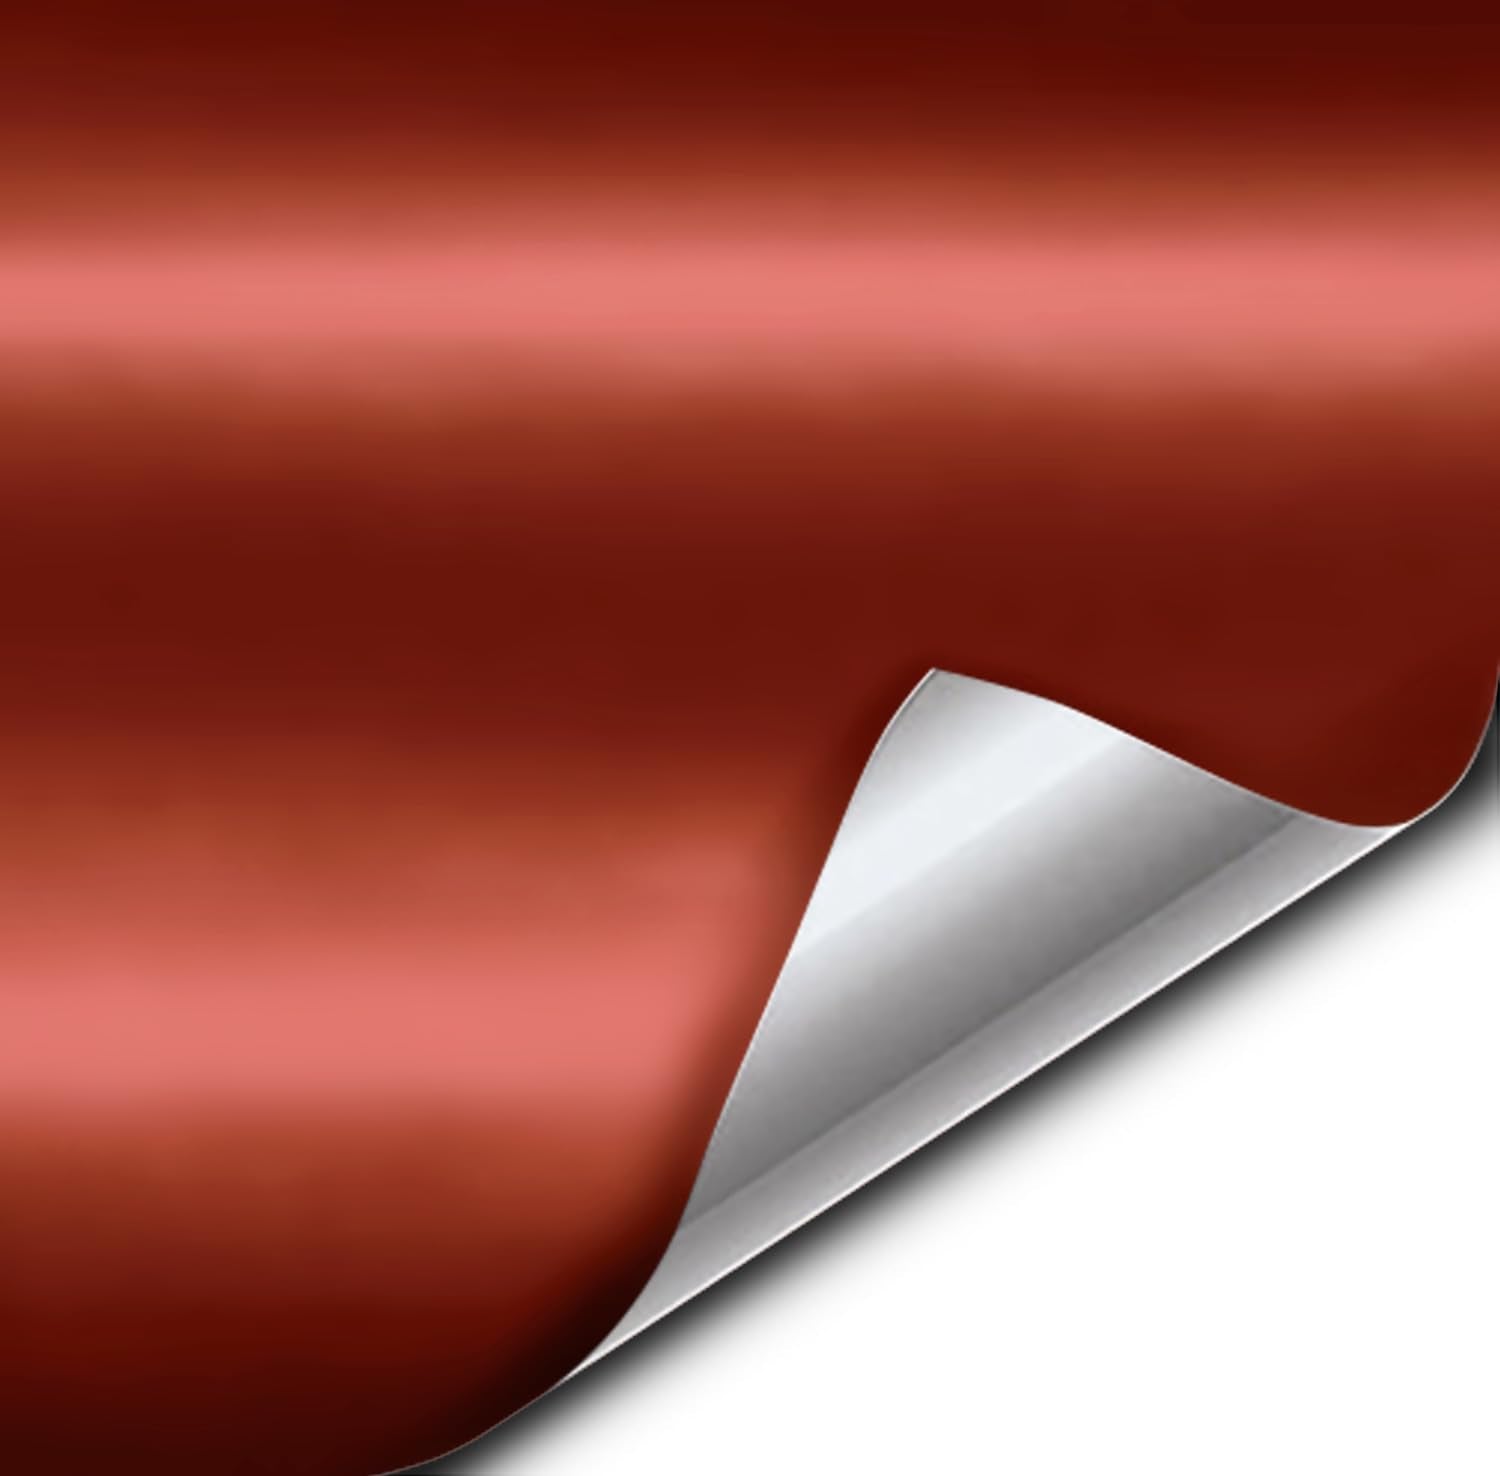 Copper Satin Chrome Conformable Stretch Vinyl Wrap Roll with VViViD XPO Air Release Technology - 1ft x 5ft